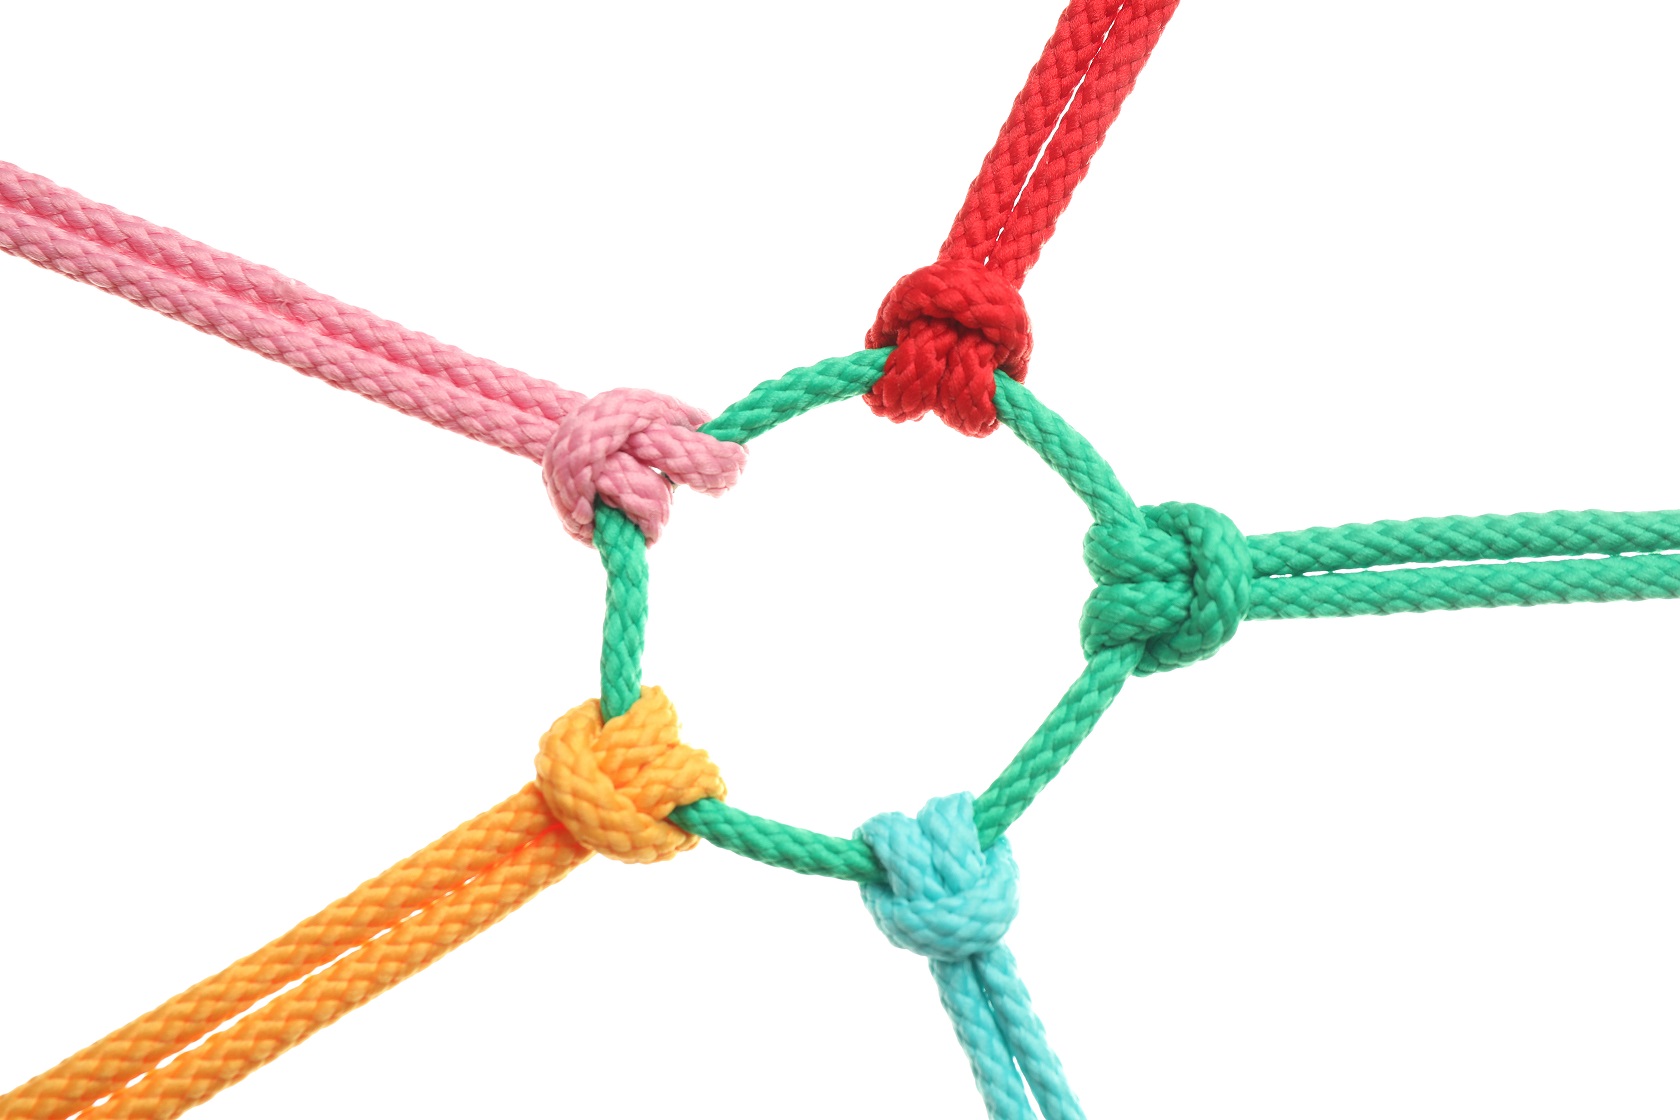 Colorful ropes tied together on white background. - Building a Good Life